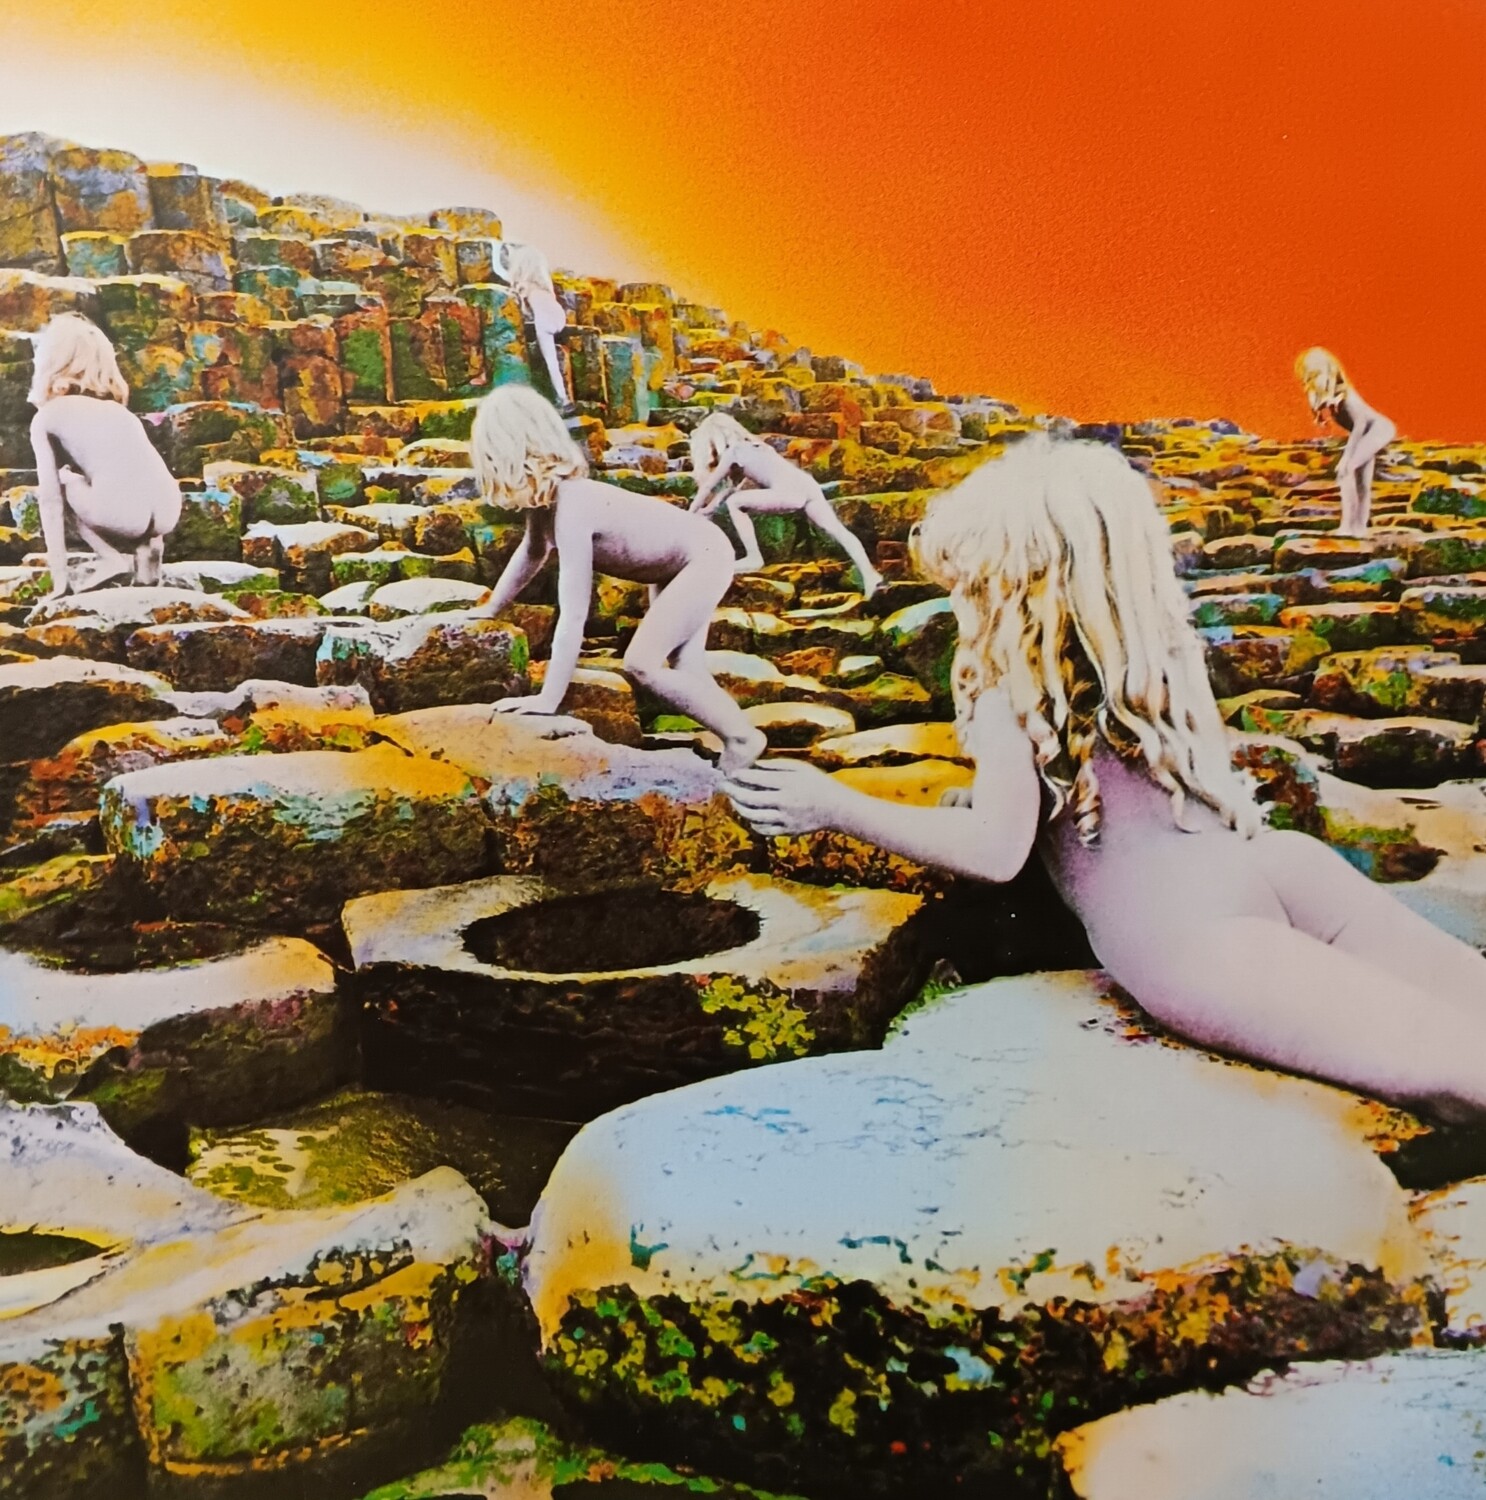 LED ZEPPELIN - Houses of the holy